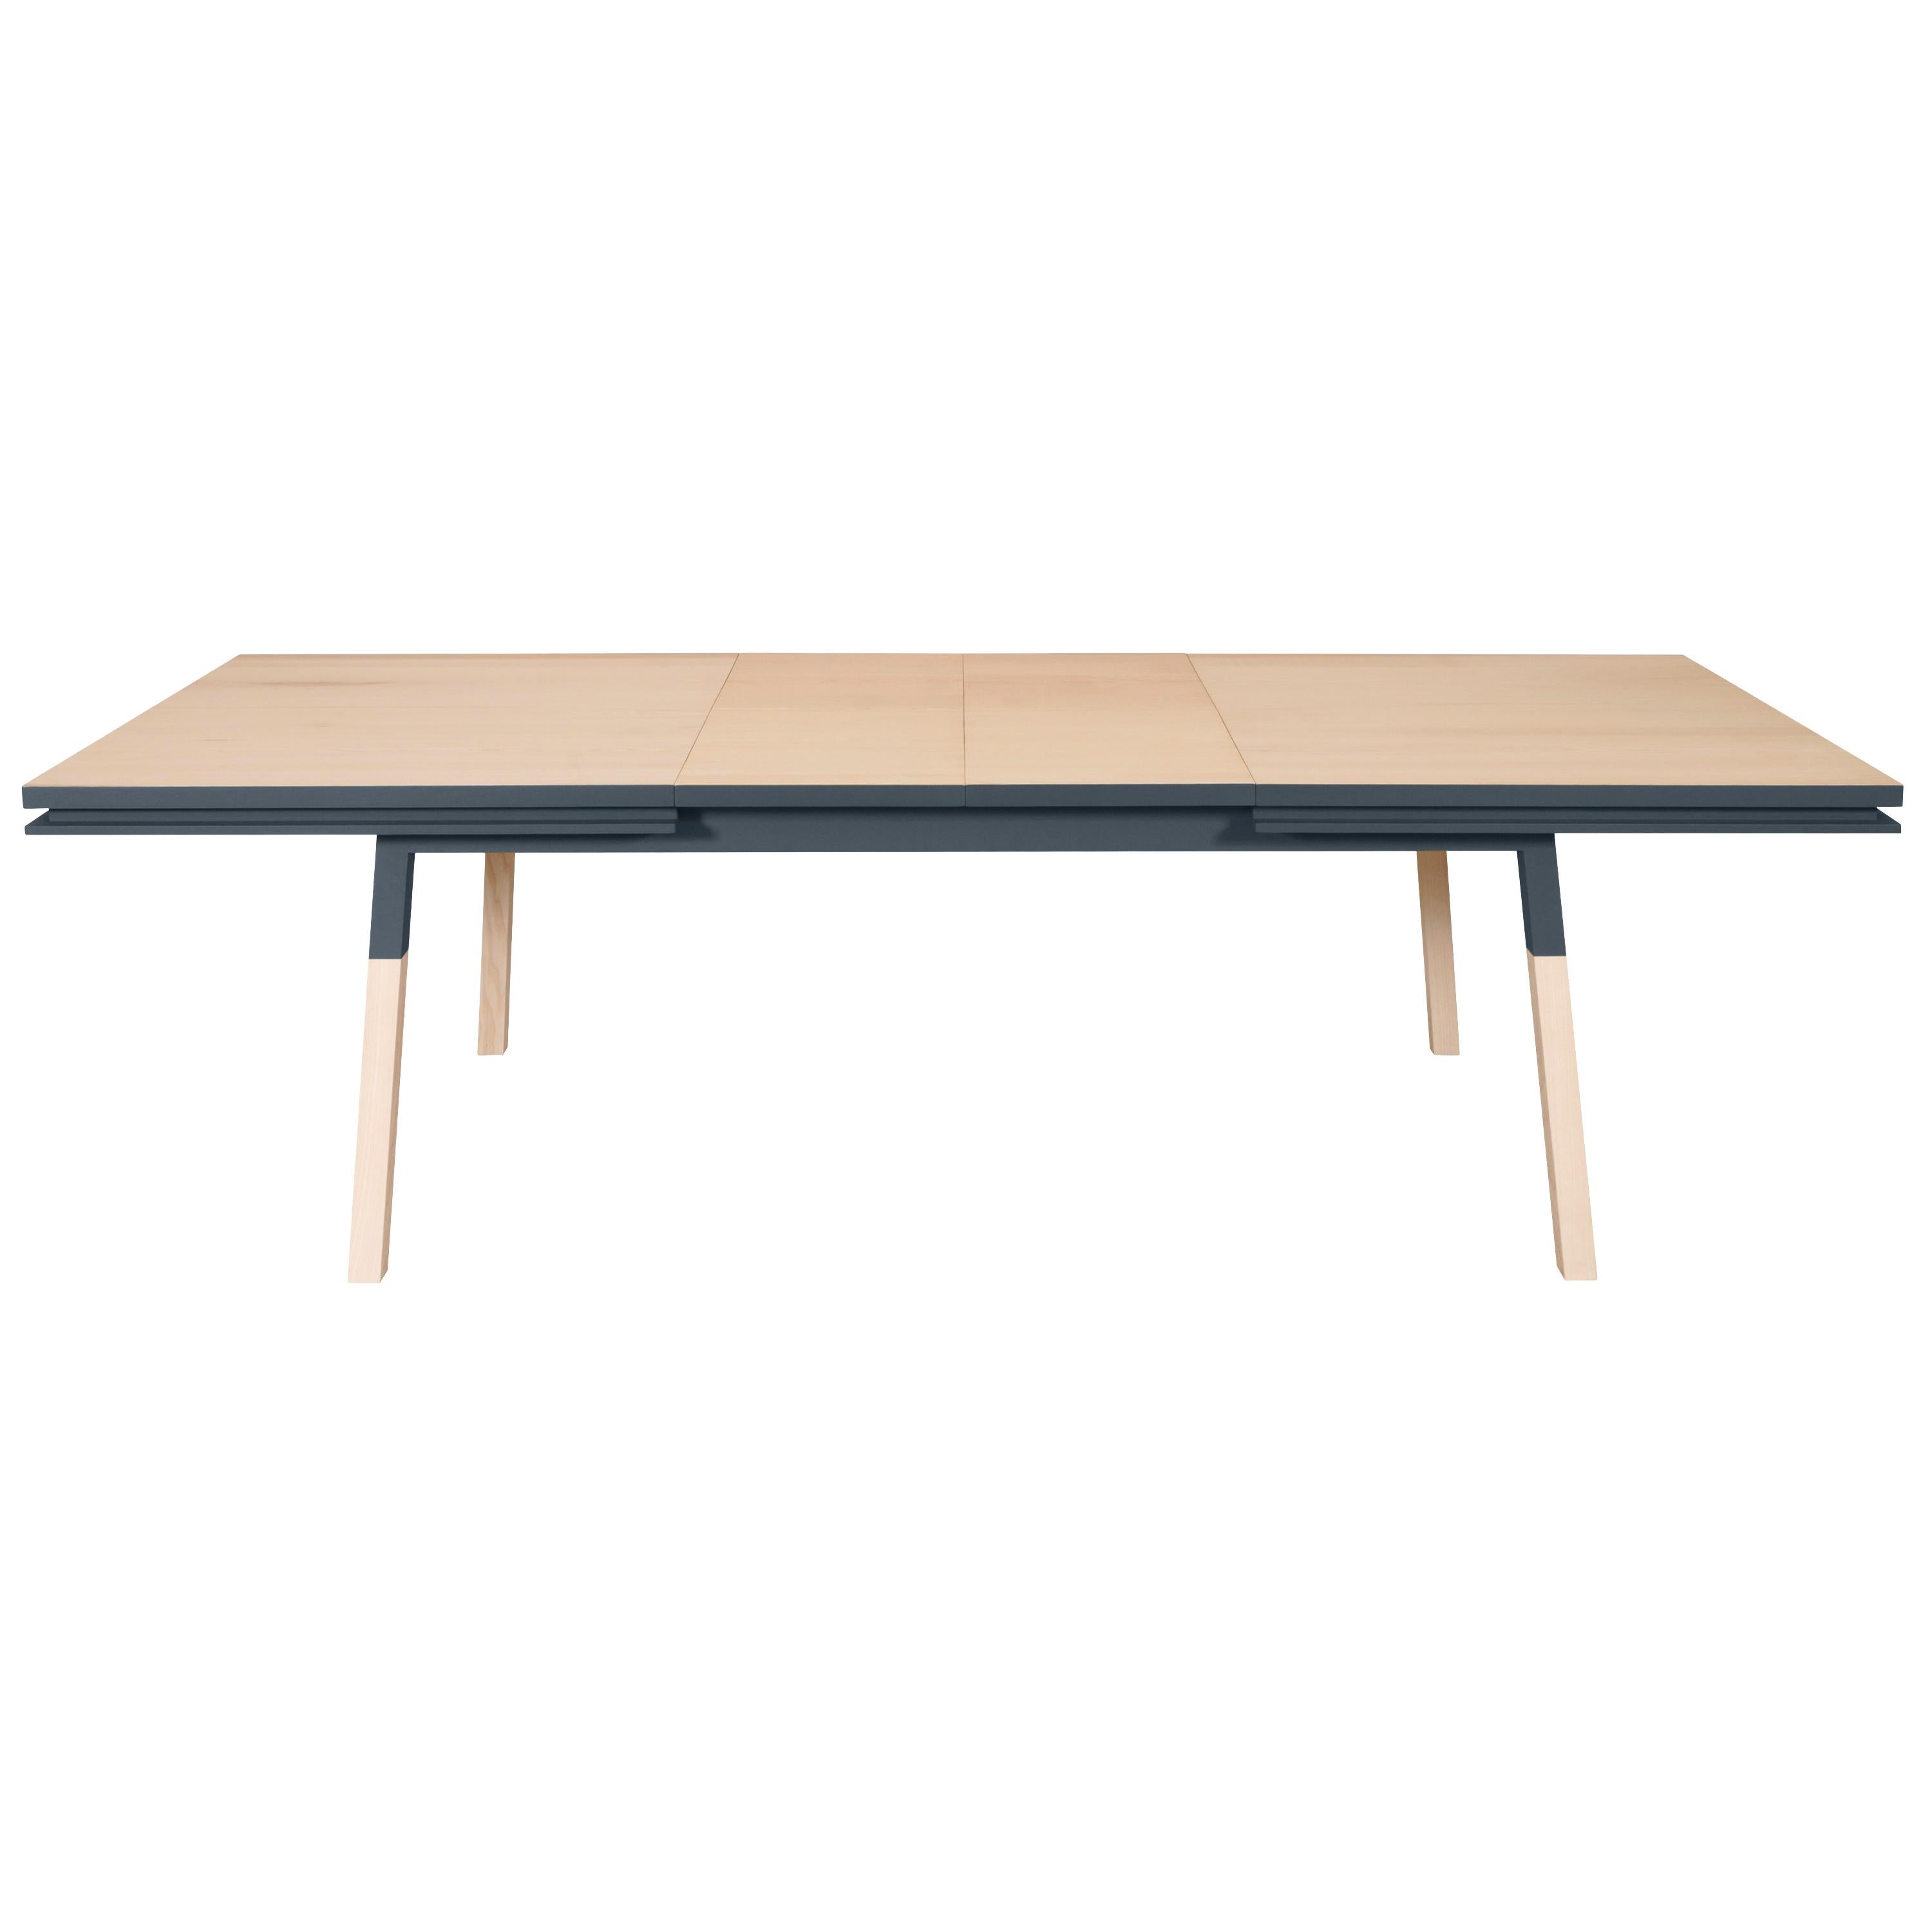 French Dark Blue Extensible Design Table, 100% Solid Wood, Design by E. Gizard, Paris For Sale